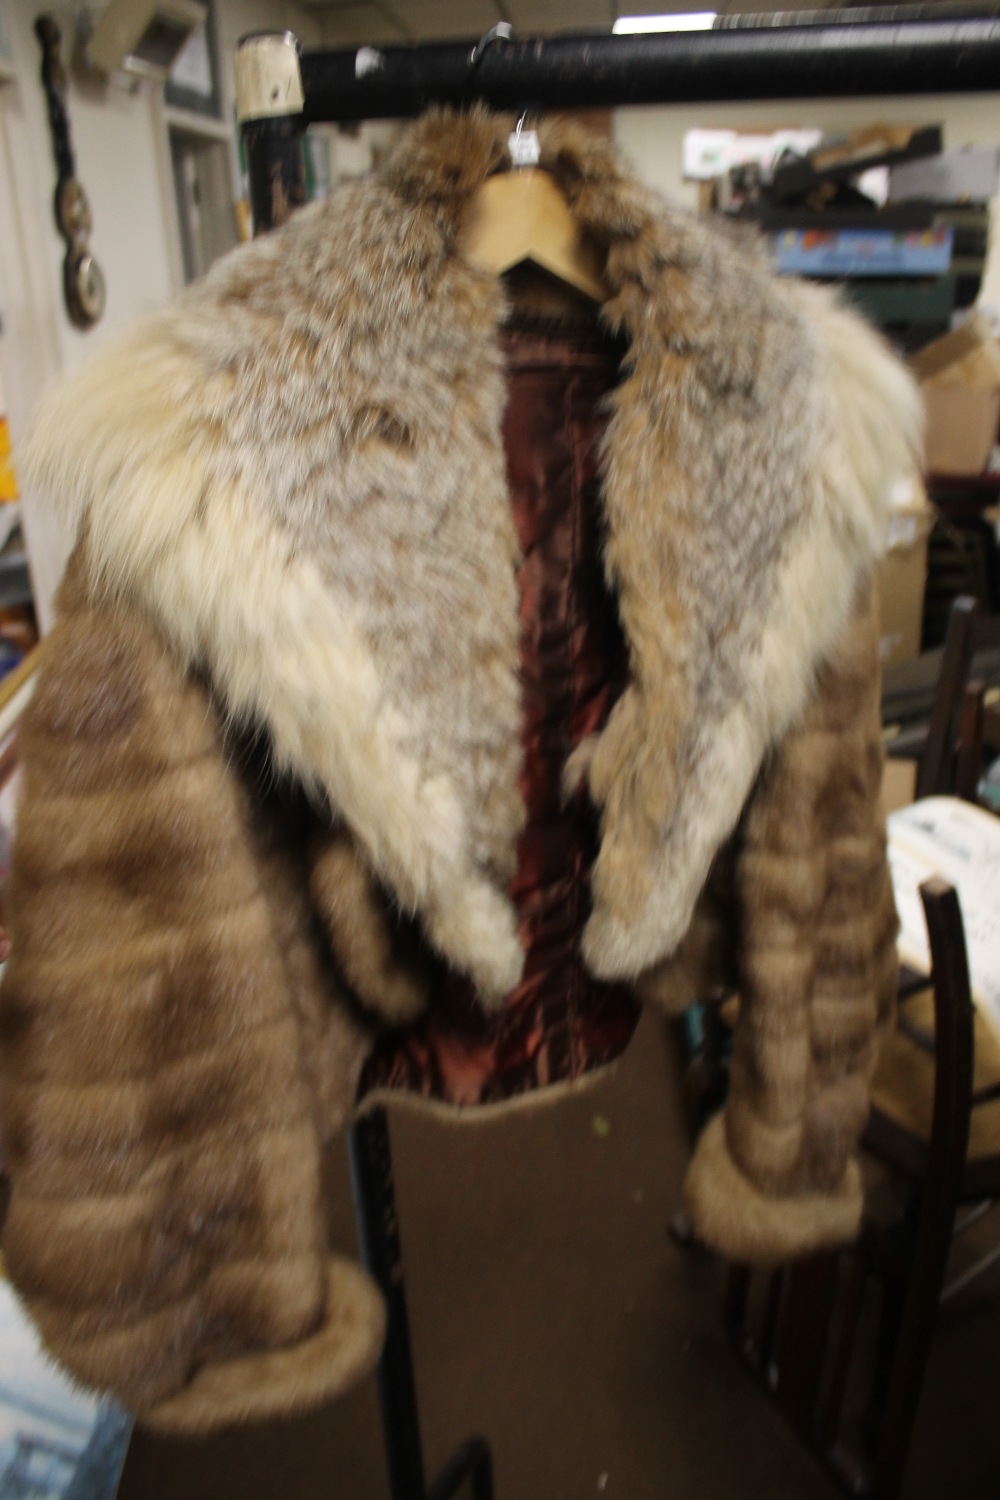 A COLLECTION OF FUR COATS, A STOLE AND A SHEEPSKIN - Image 4 of 4